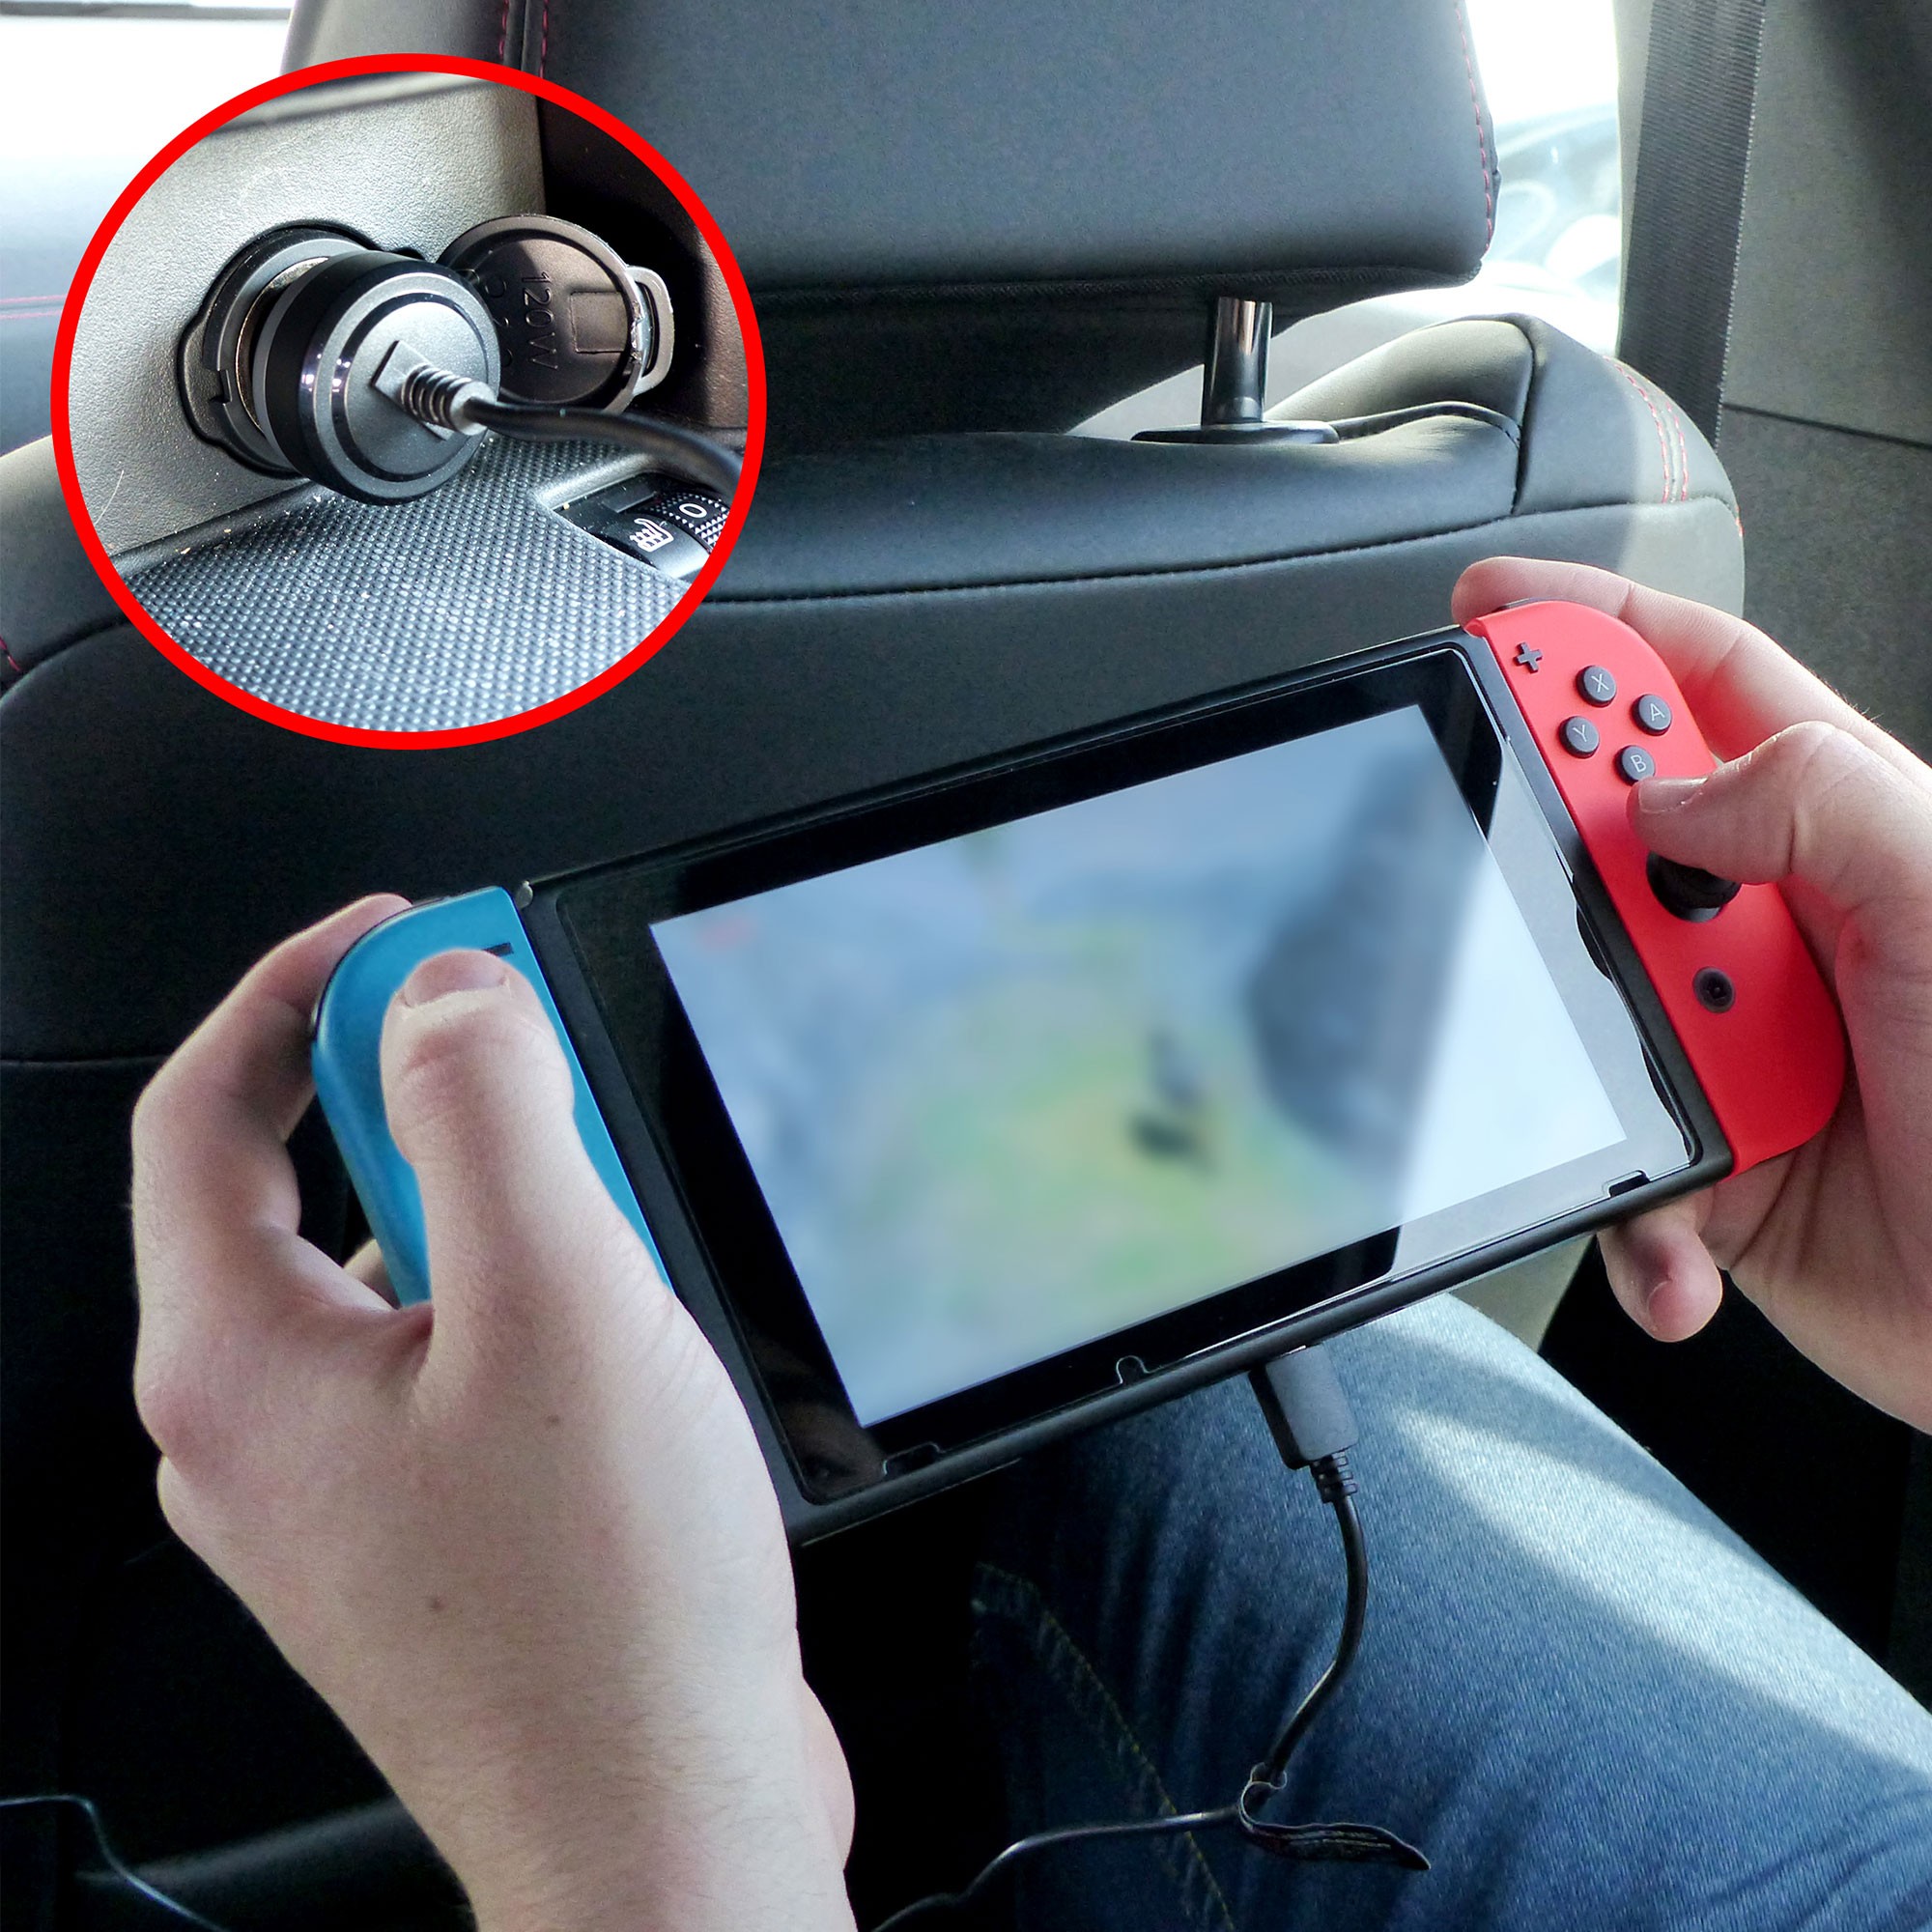 Usb-c car charger for Nintendo Switch, Lite, Oled.